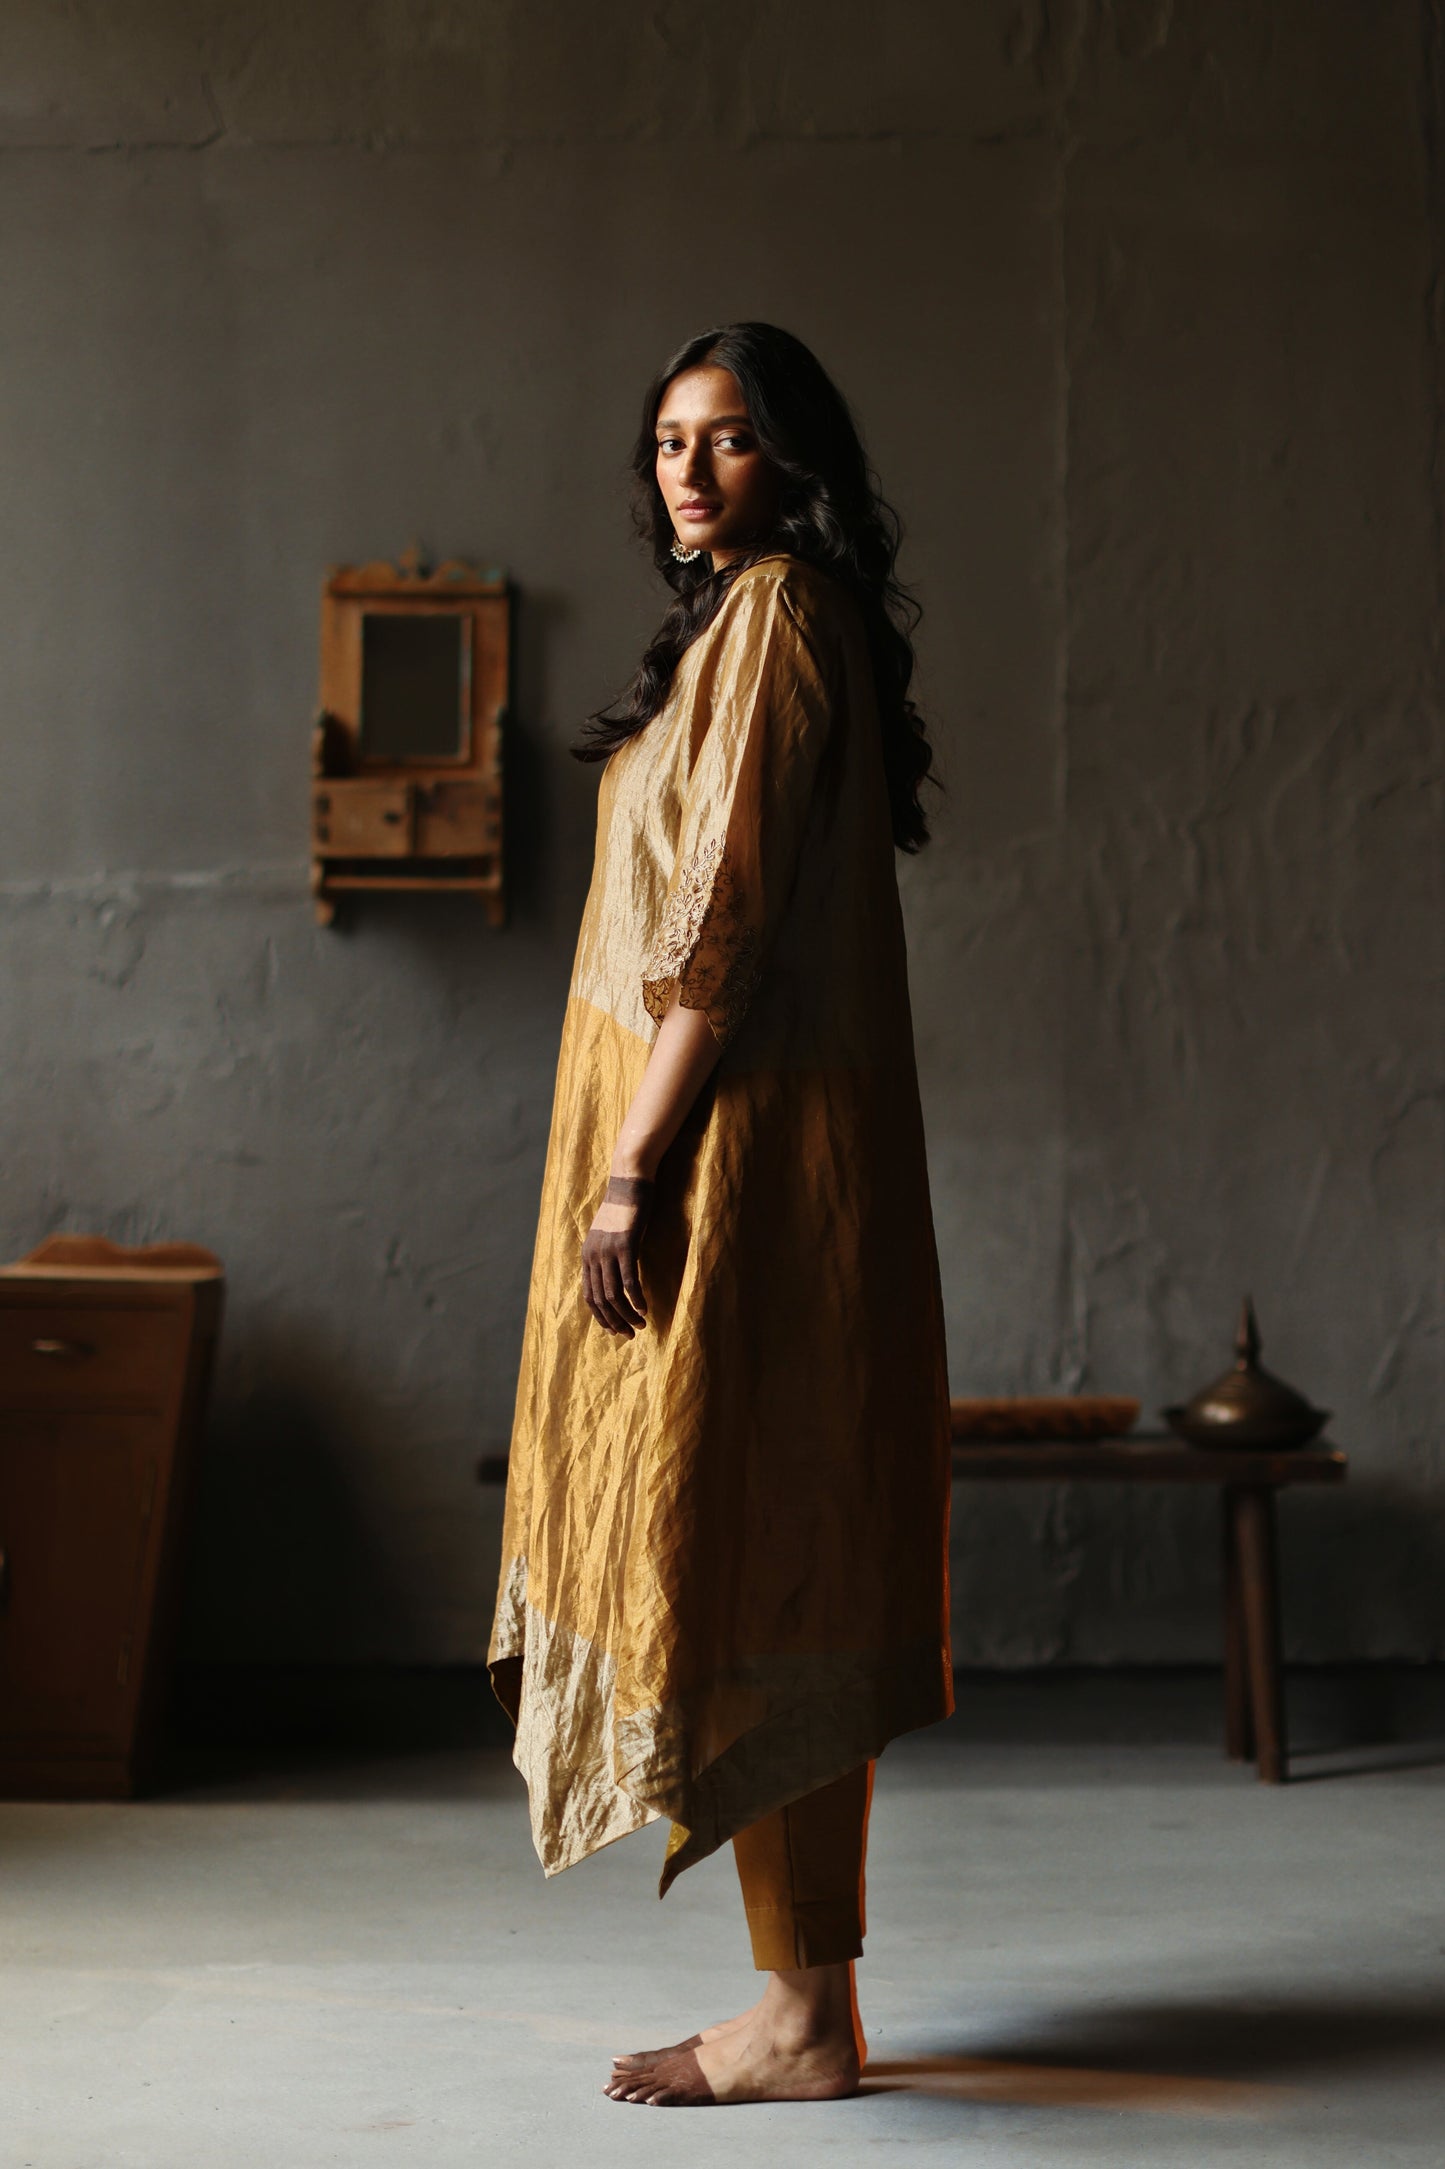 Asymmetrical Dress in Vintage Gold Tissue with Pants